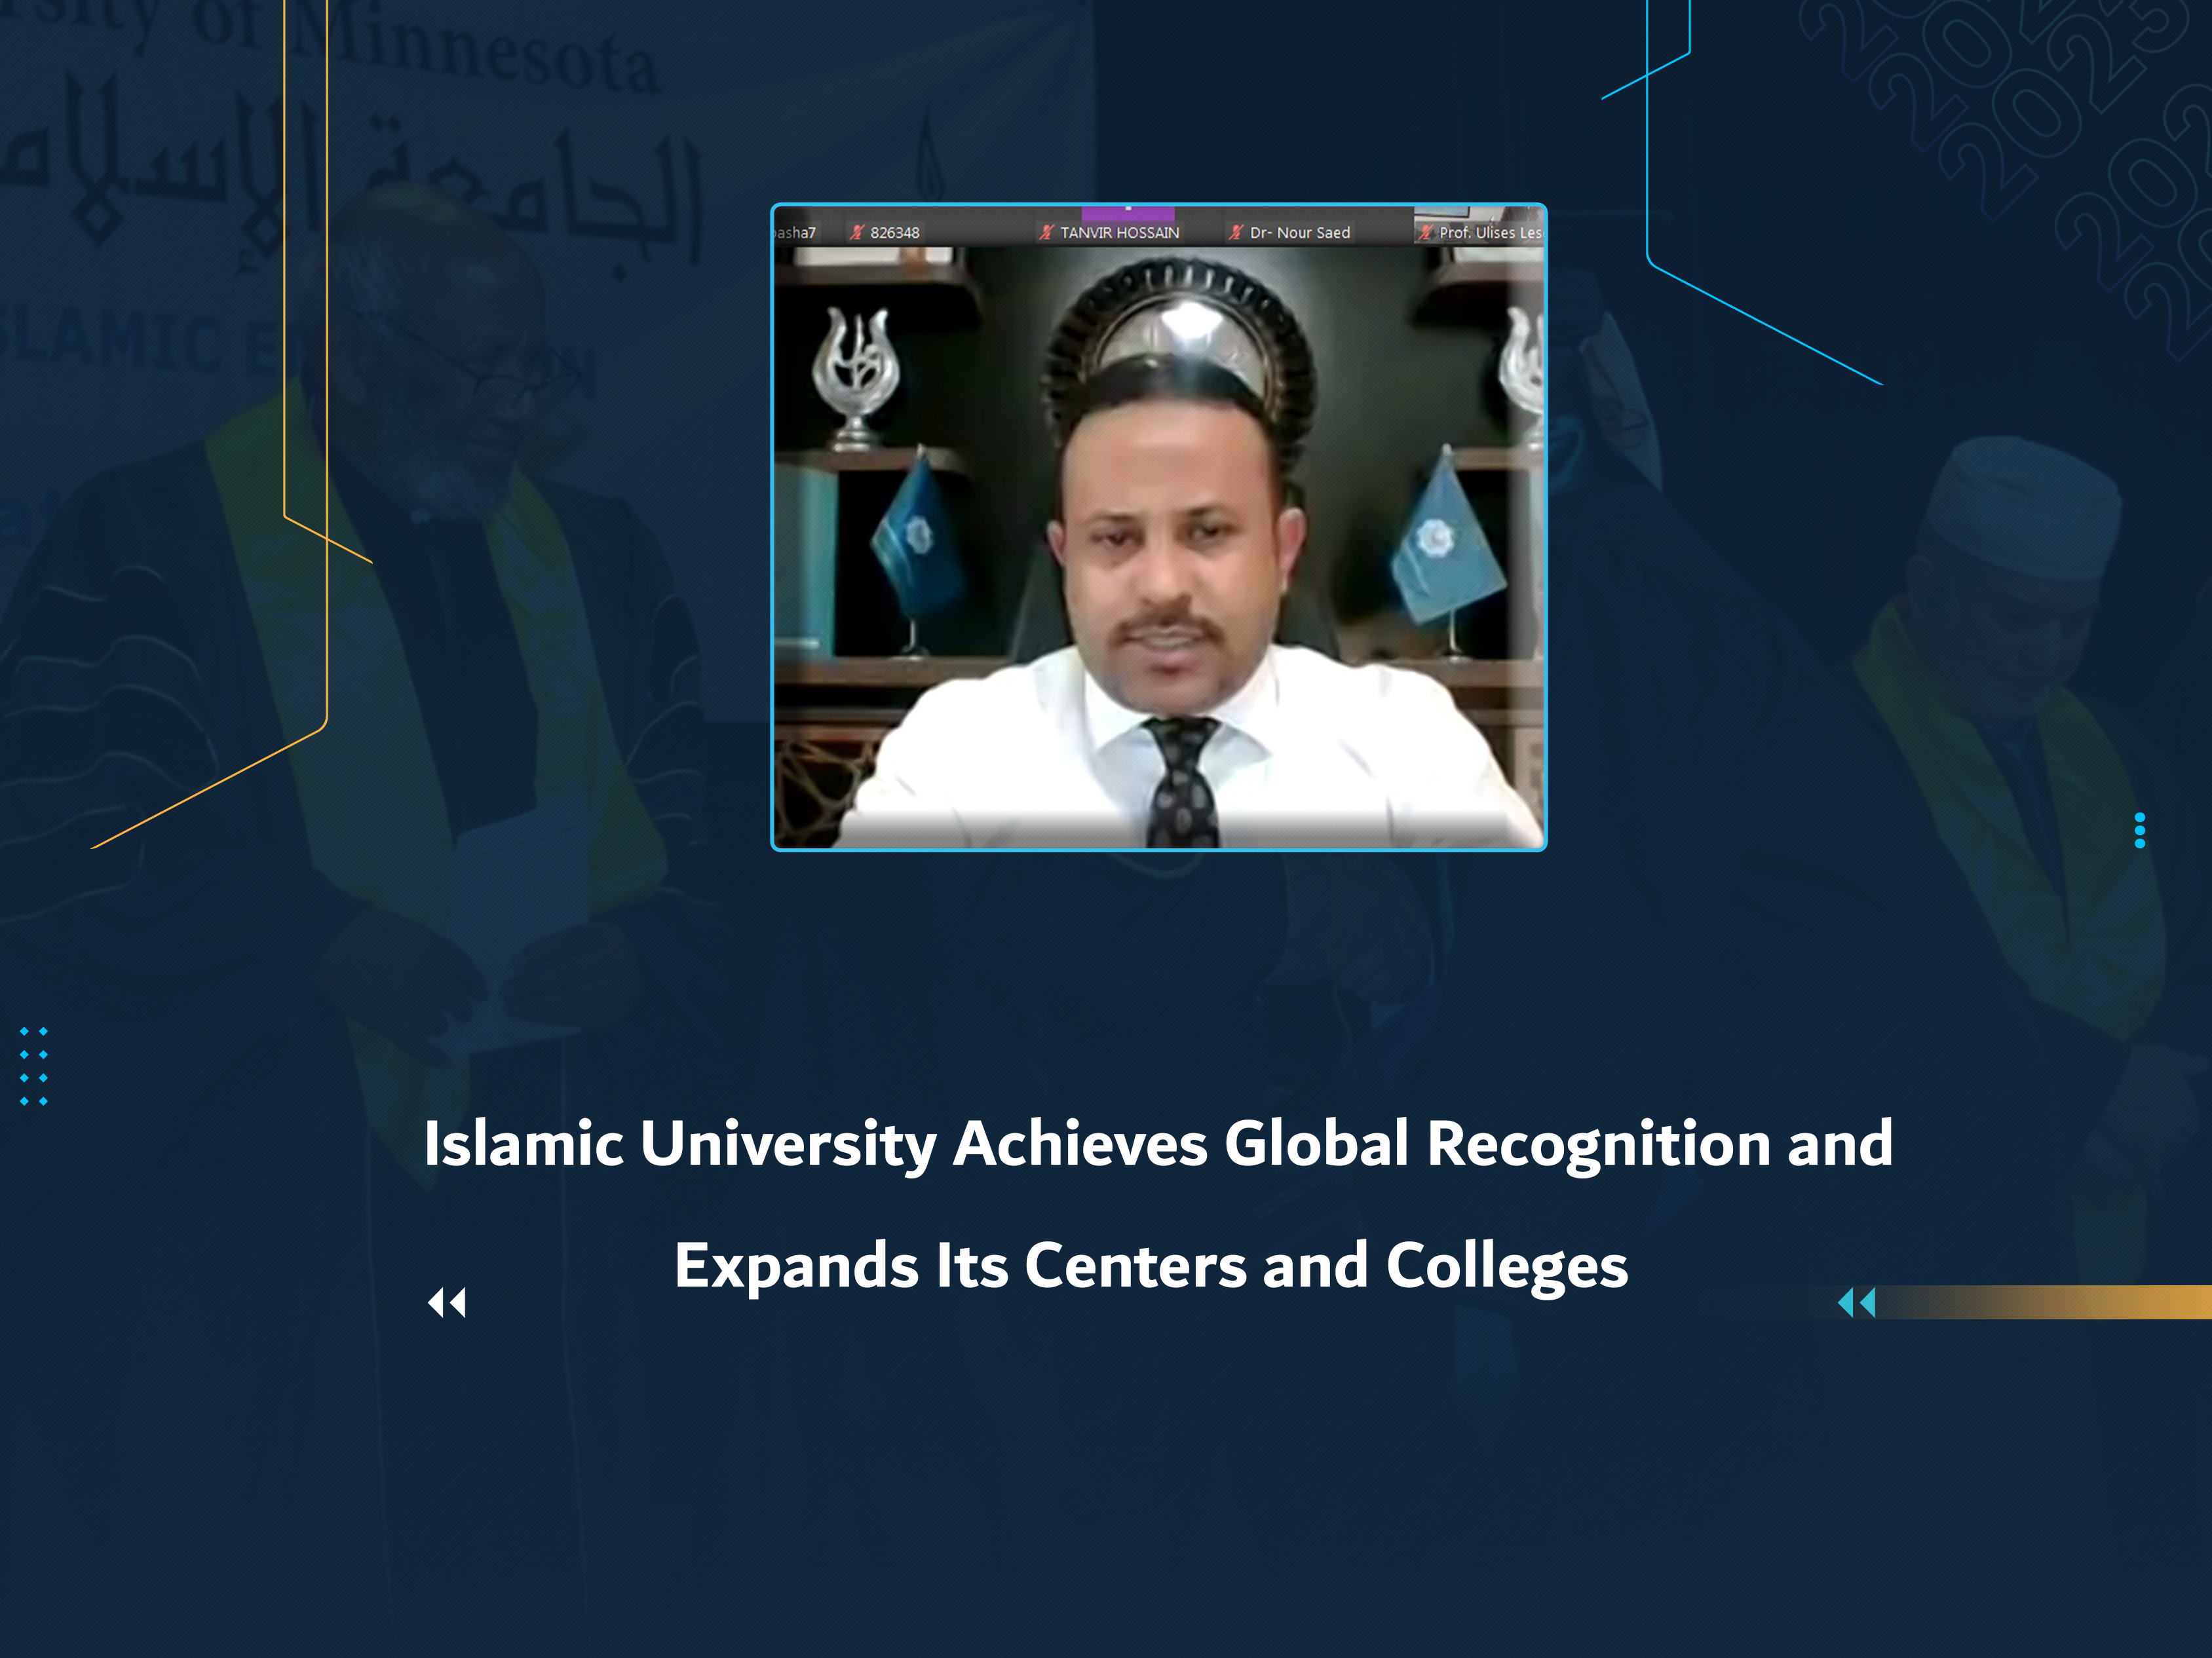 Islamic University Achieves Global Recognition and Expands Its Centers and Colleges